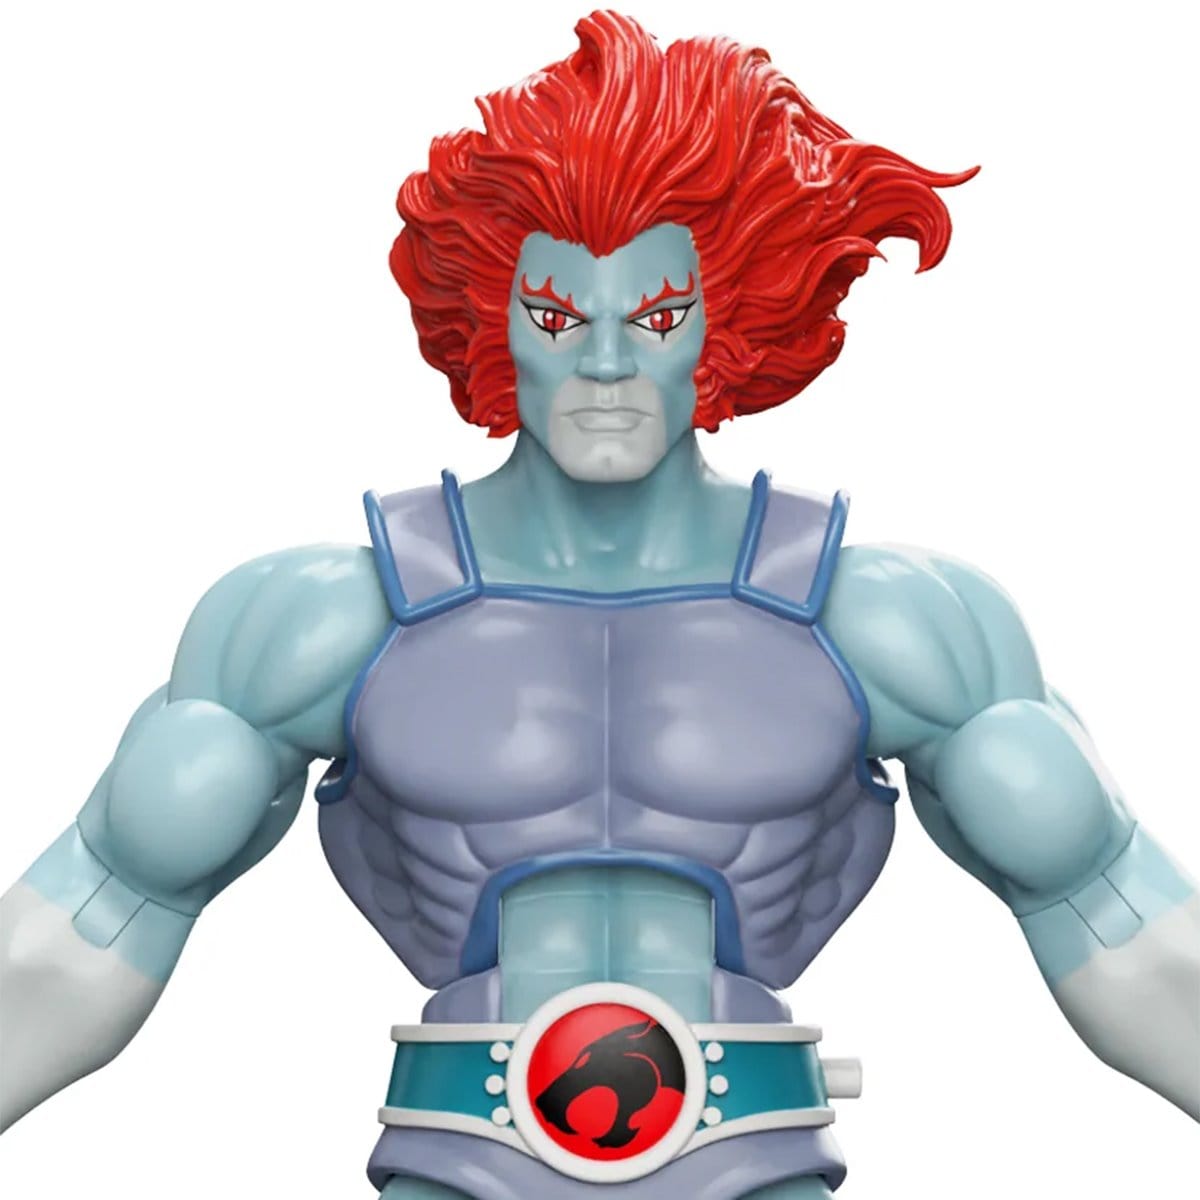 ThunderCats Ultimates Lion-O (Hook Mountain Ice) 7-Inch Action Figure - SDCC Exclusive Pop-O-Loco